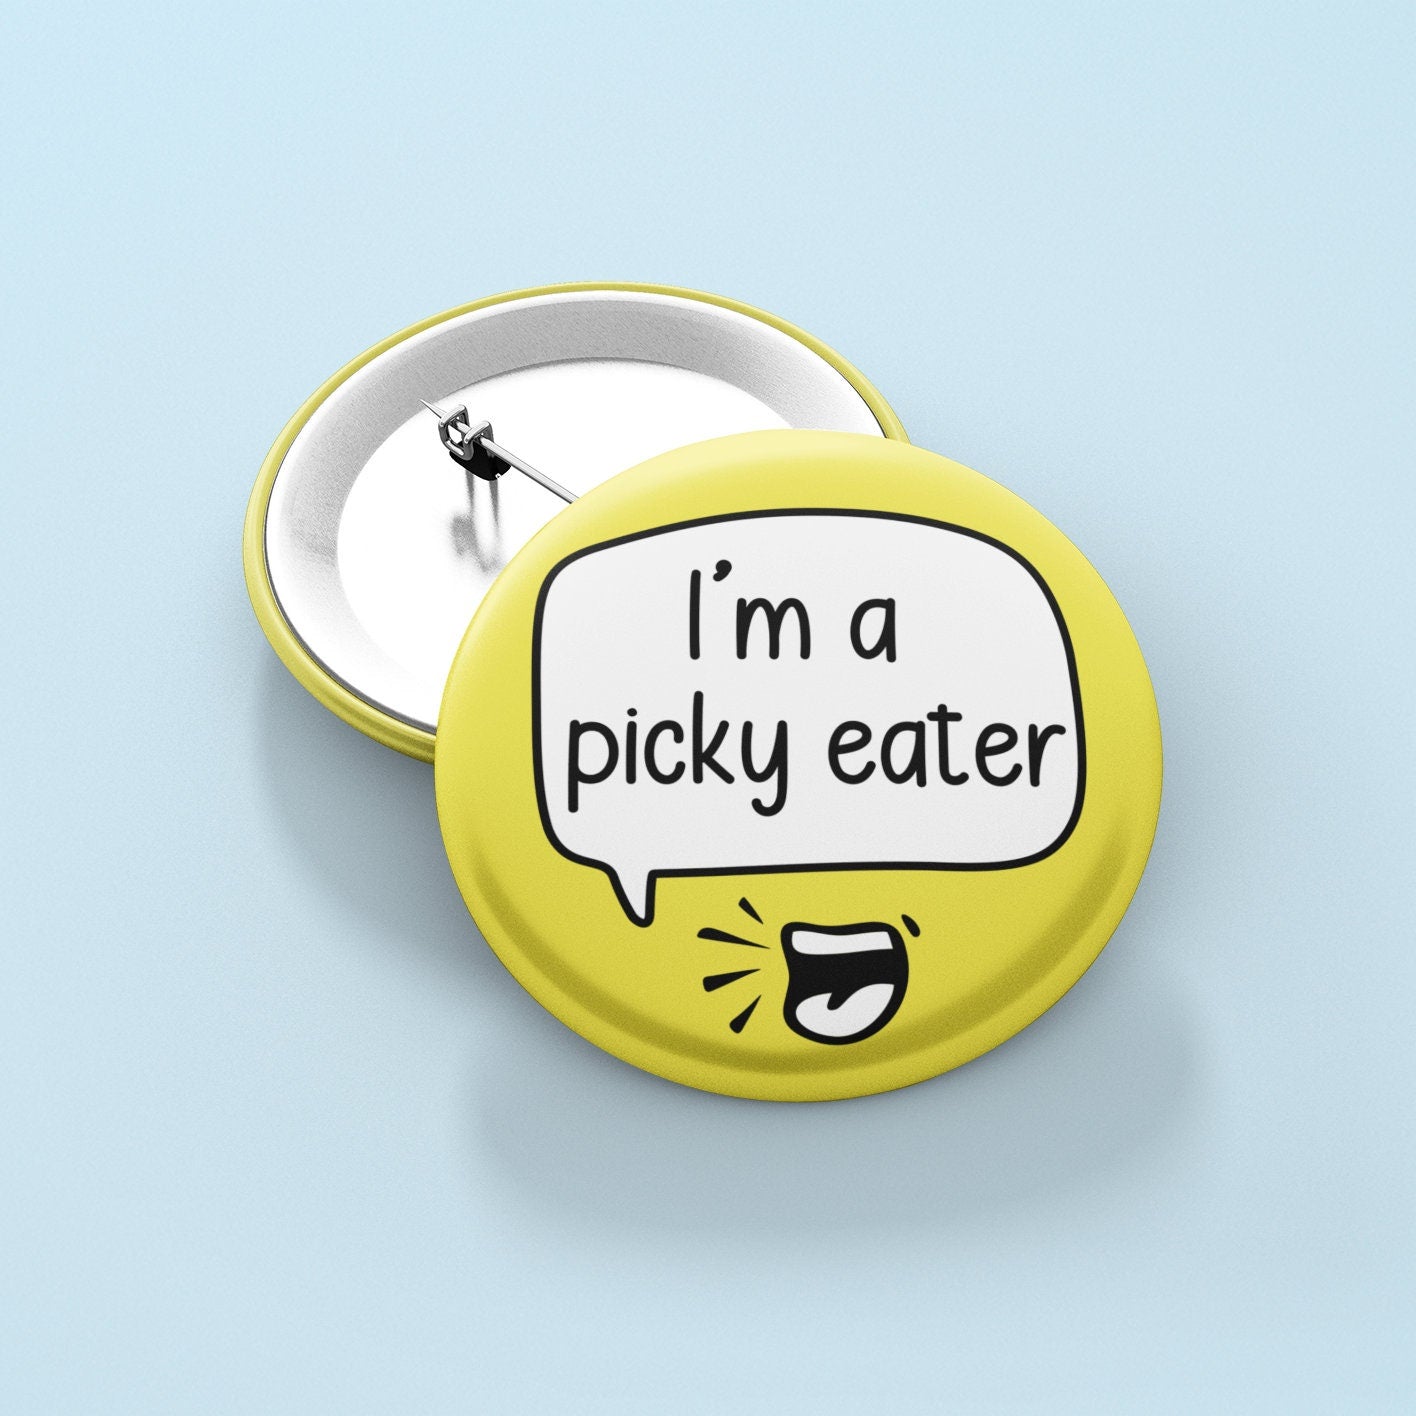 I'm A Picky Eater - Badge Pin | Sensory Processing Disorder